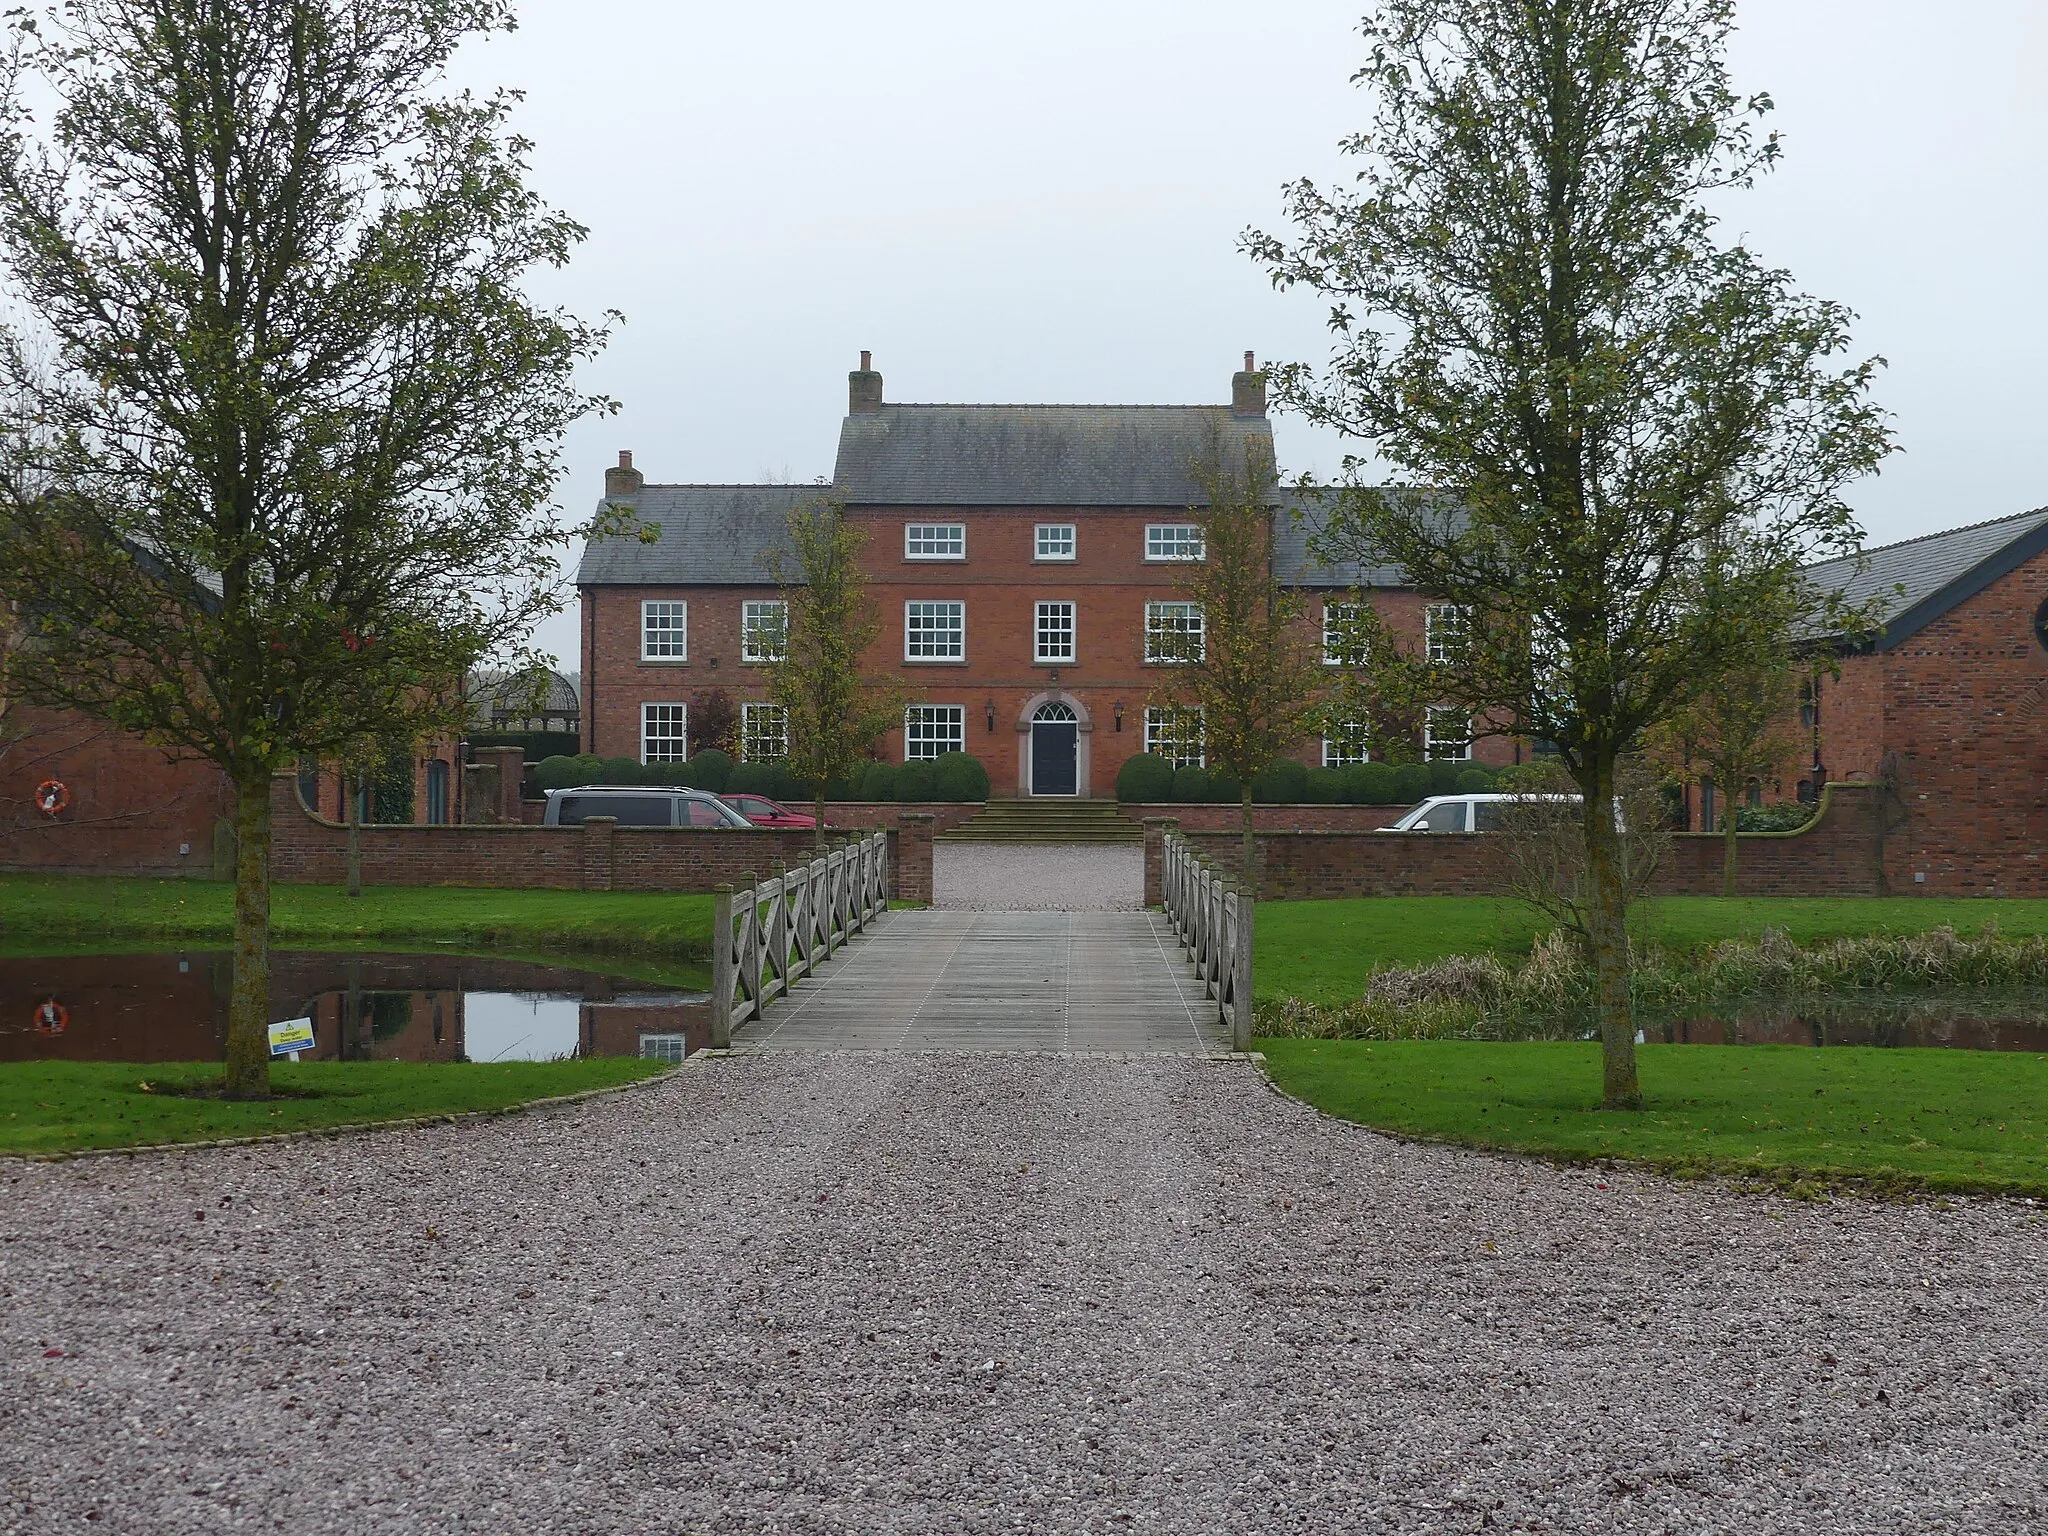 Photo showing: Brick House Farmhouse: Grade II listed house in the parish of Hulme Walfield, Cheshire East. Wikidata has entry Brick House Farmhouse (Q26455399) with data related to this item.